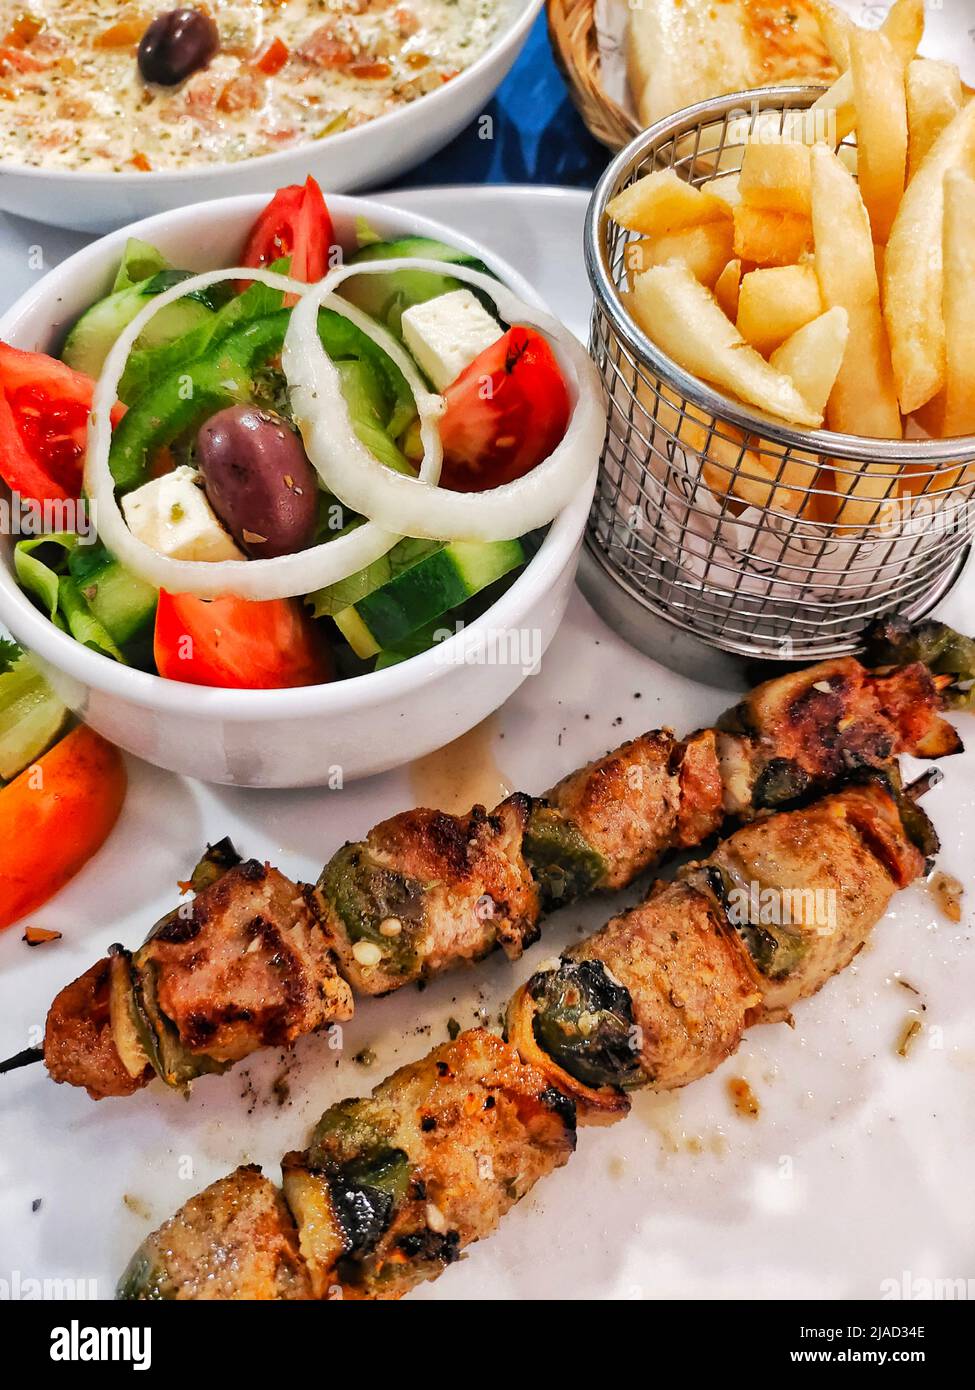 Souvlaki with a greek salad, chips, bread and dip Stock Photo